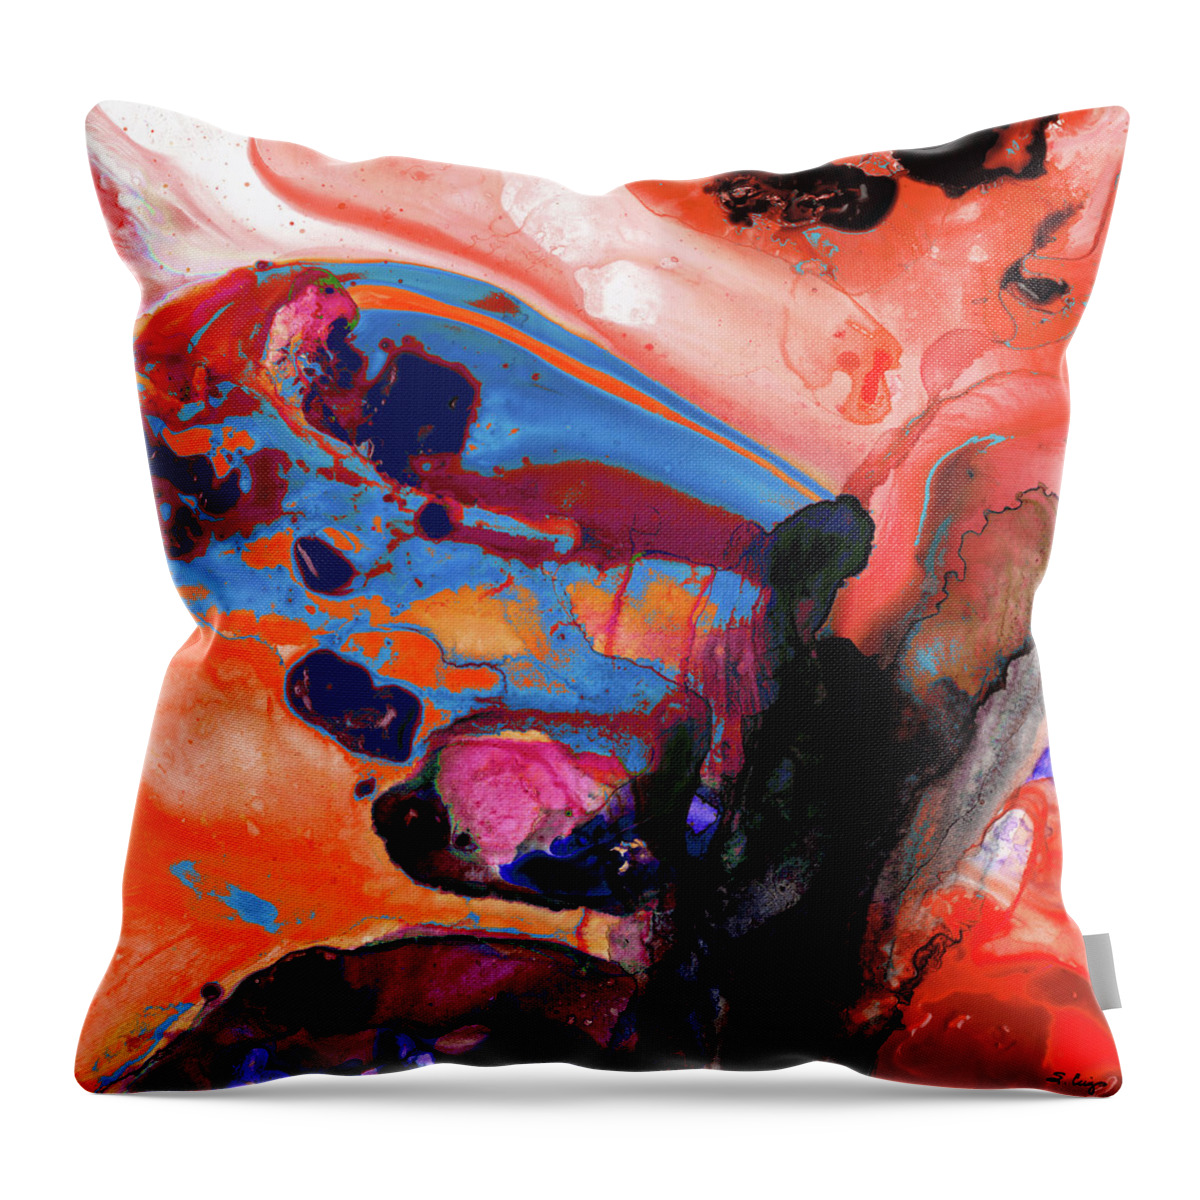 Red Throw Pillow featuring the painting Red And Blue Art - Prophet - Sharon Cummings by Sharon Cummings